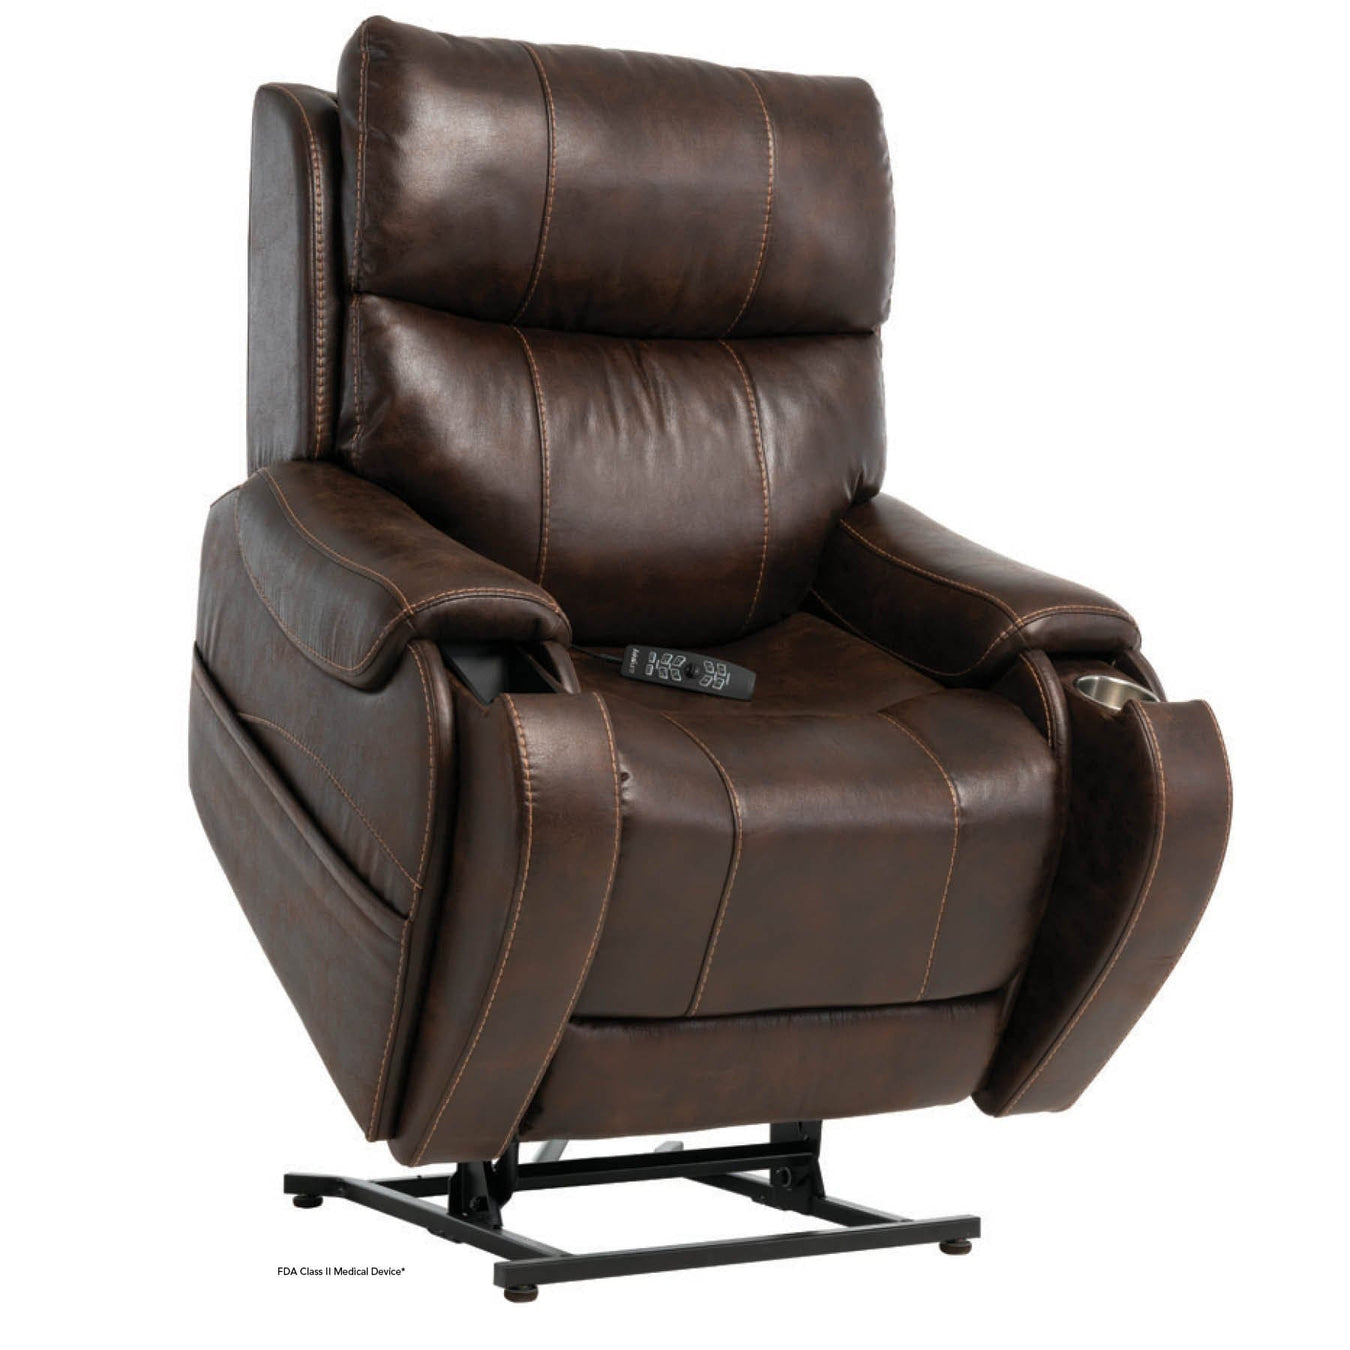 Pride VivaLift! Atlas PLUS 2 Lift Chair Recliner PLR-2985M Arm Chairs, Recliners & Sleeper Chairs Pride Mobility Badlands Walnut  